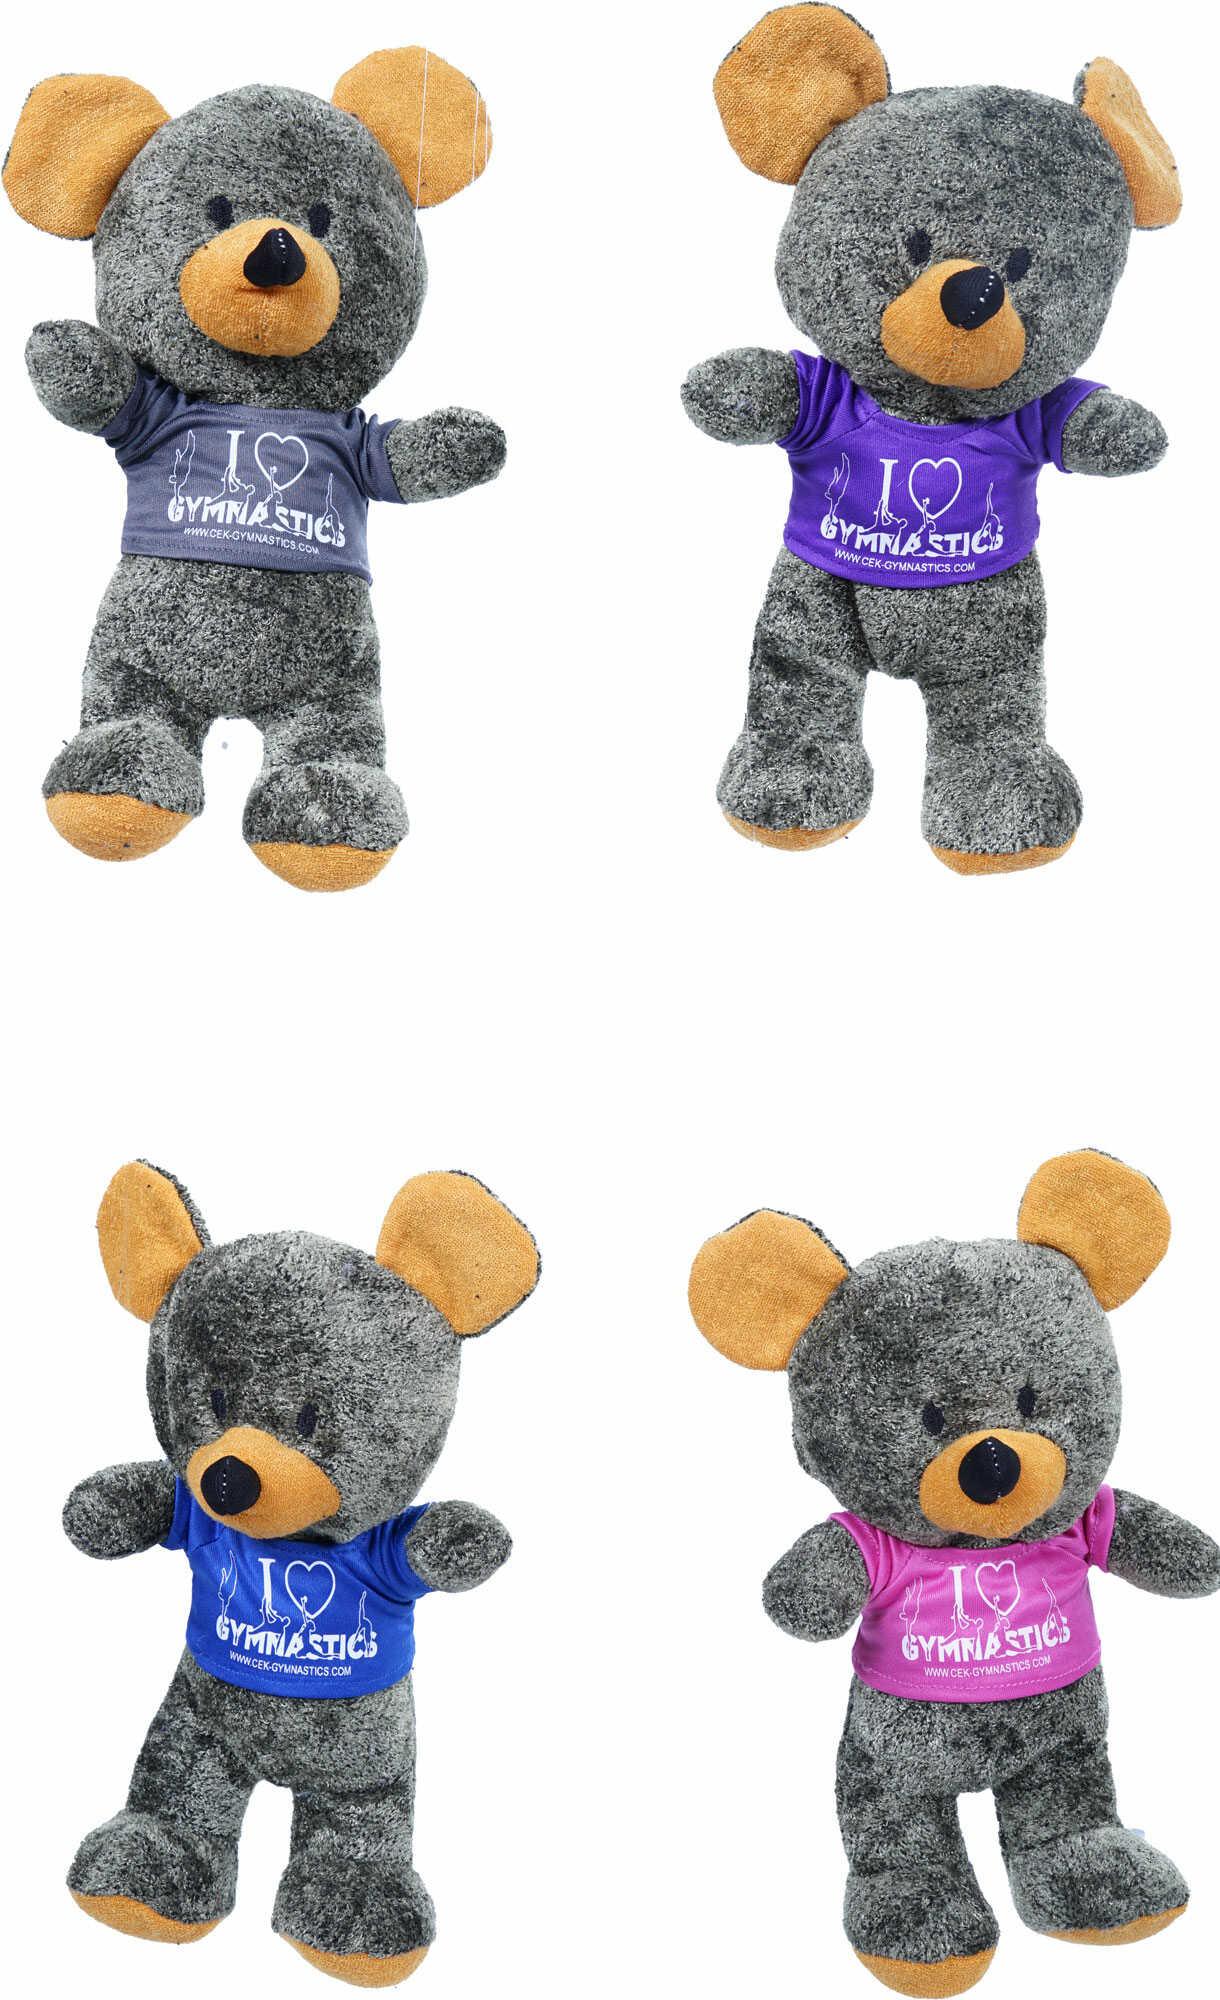 Mouse cuddly toy with promo t-shirt